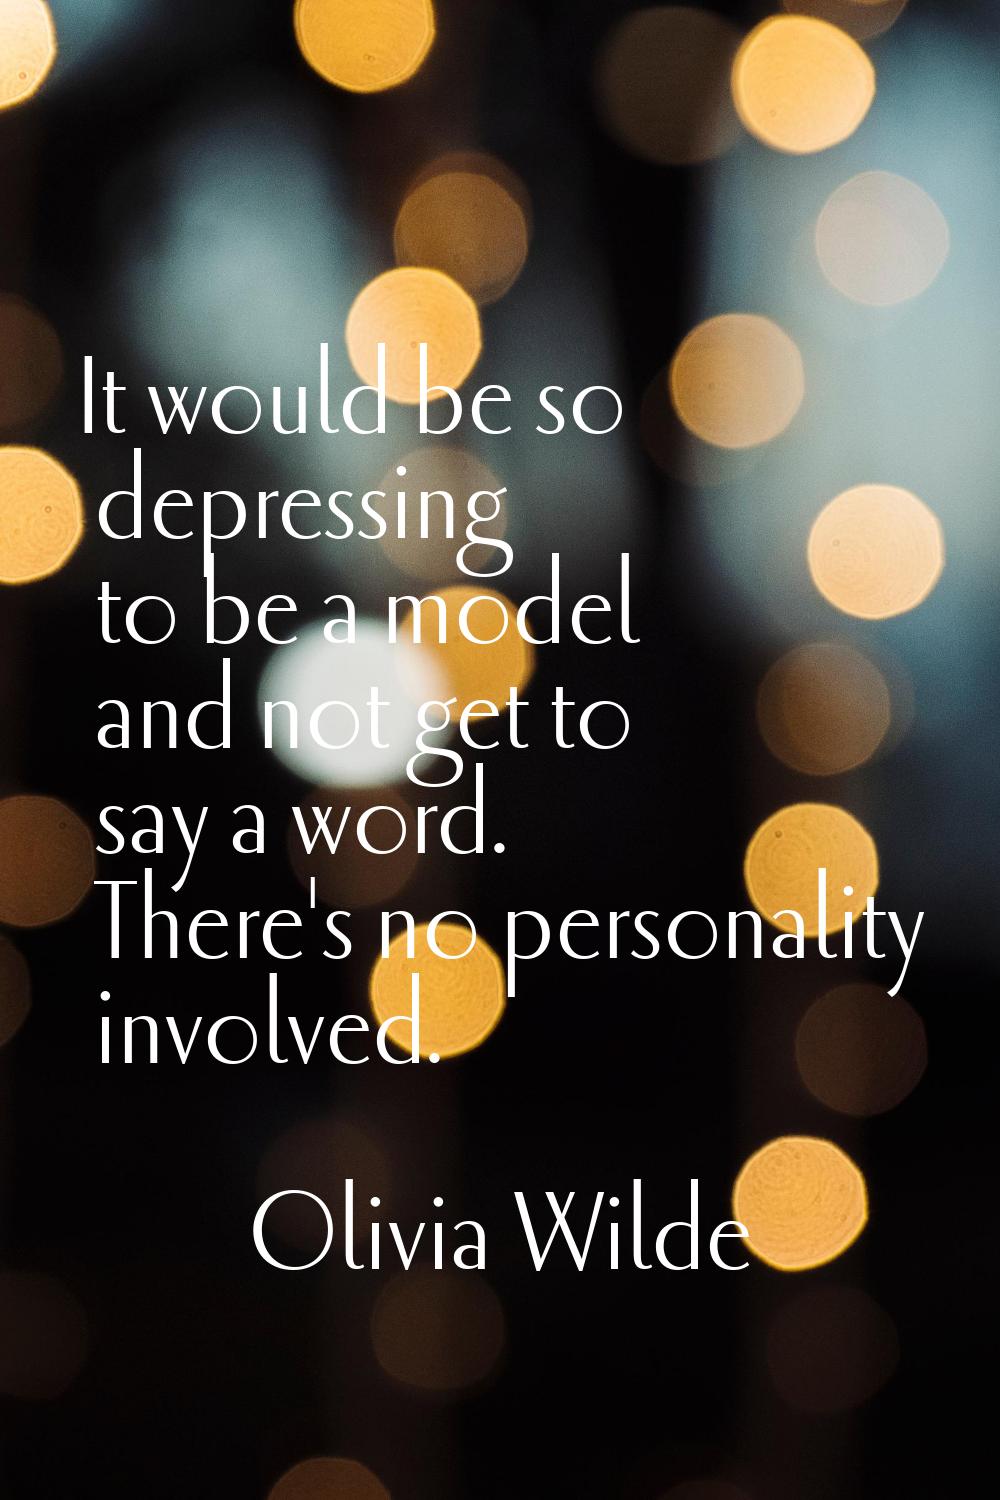 It would be so depressing to be a model and not get to say a word. There's no personality involved.